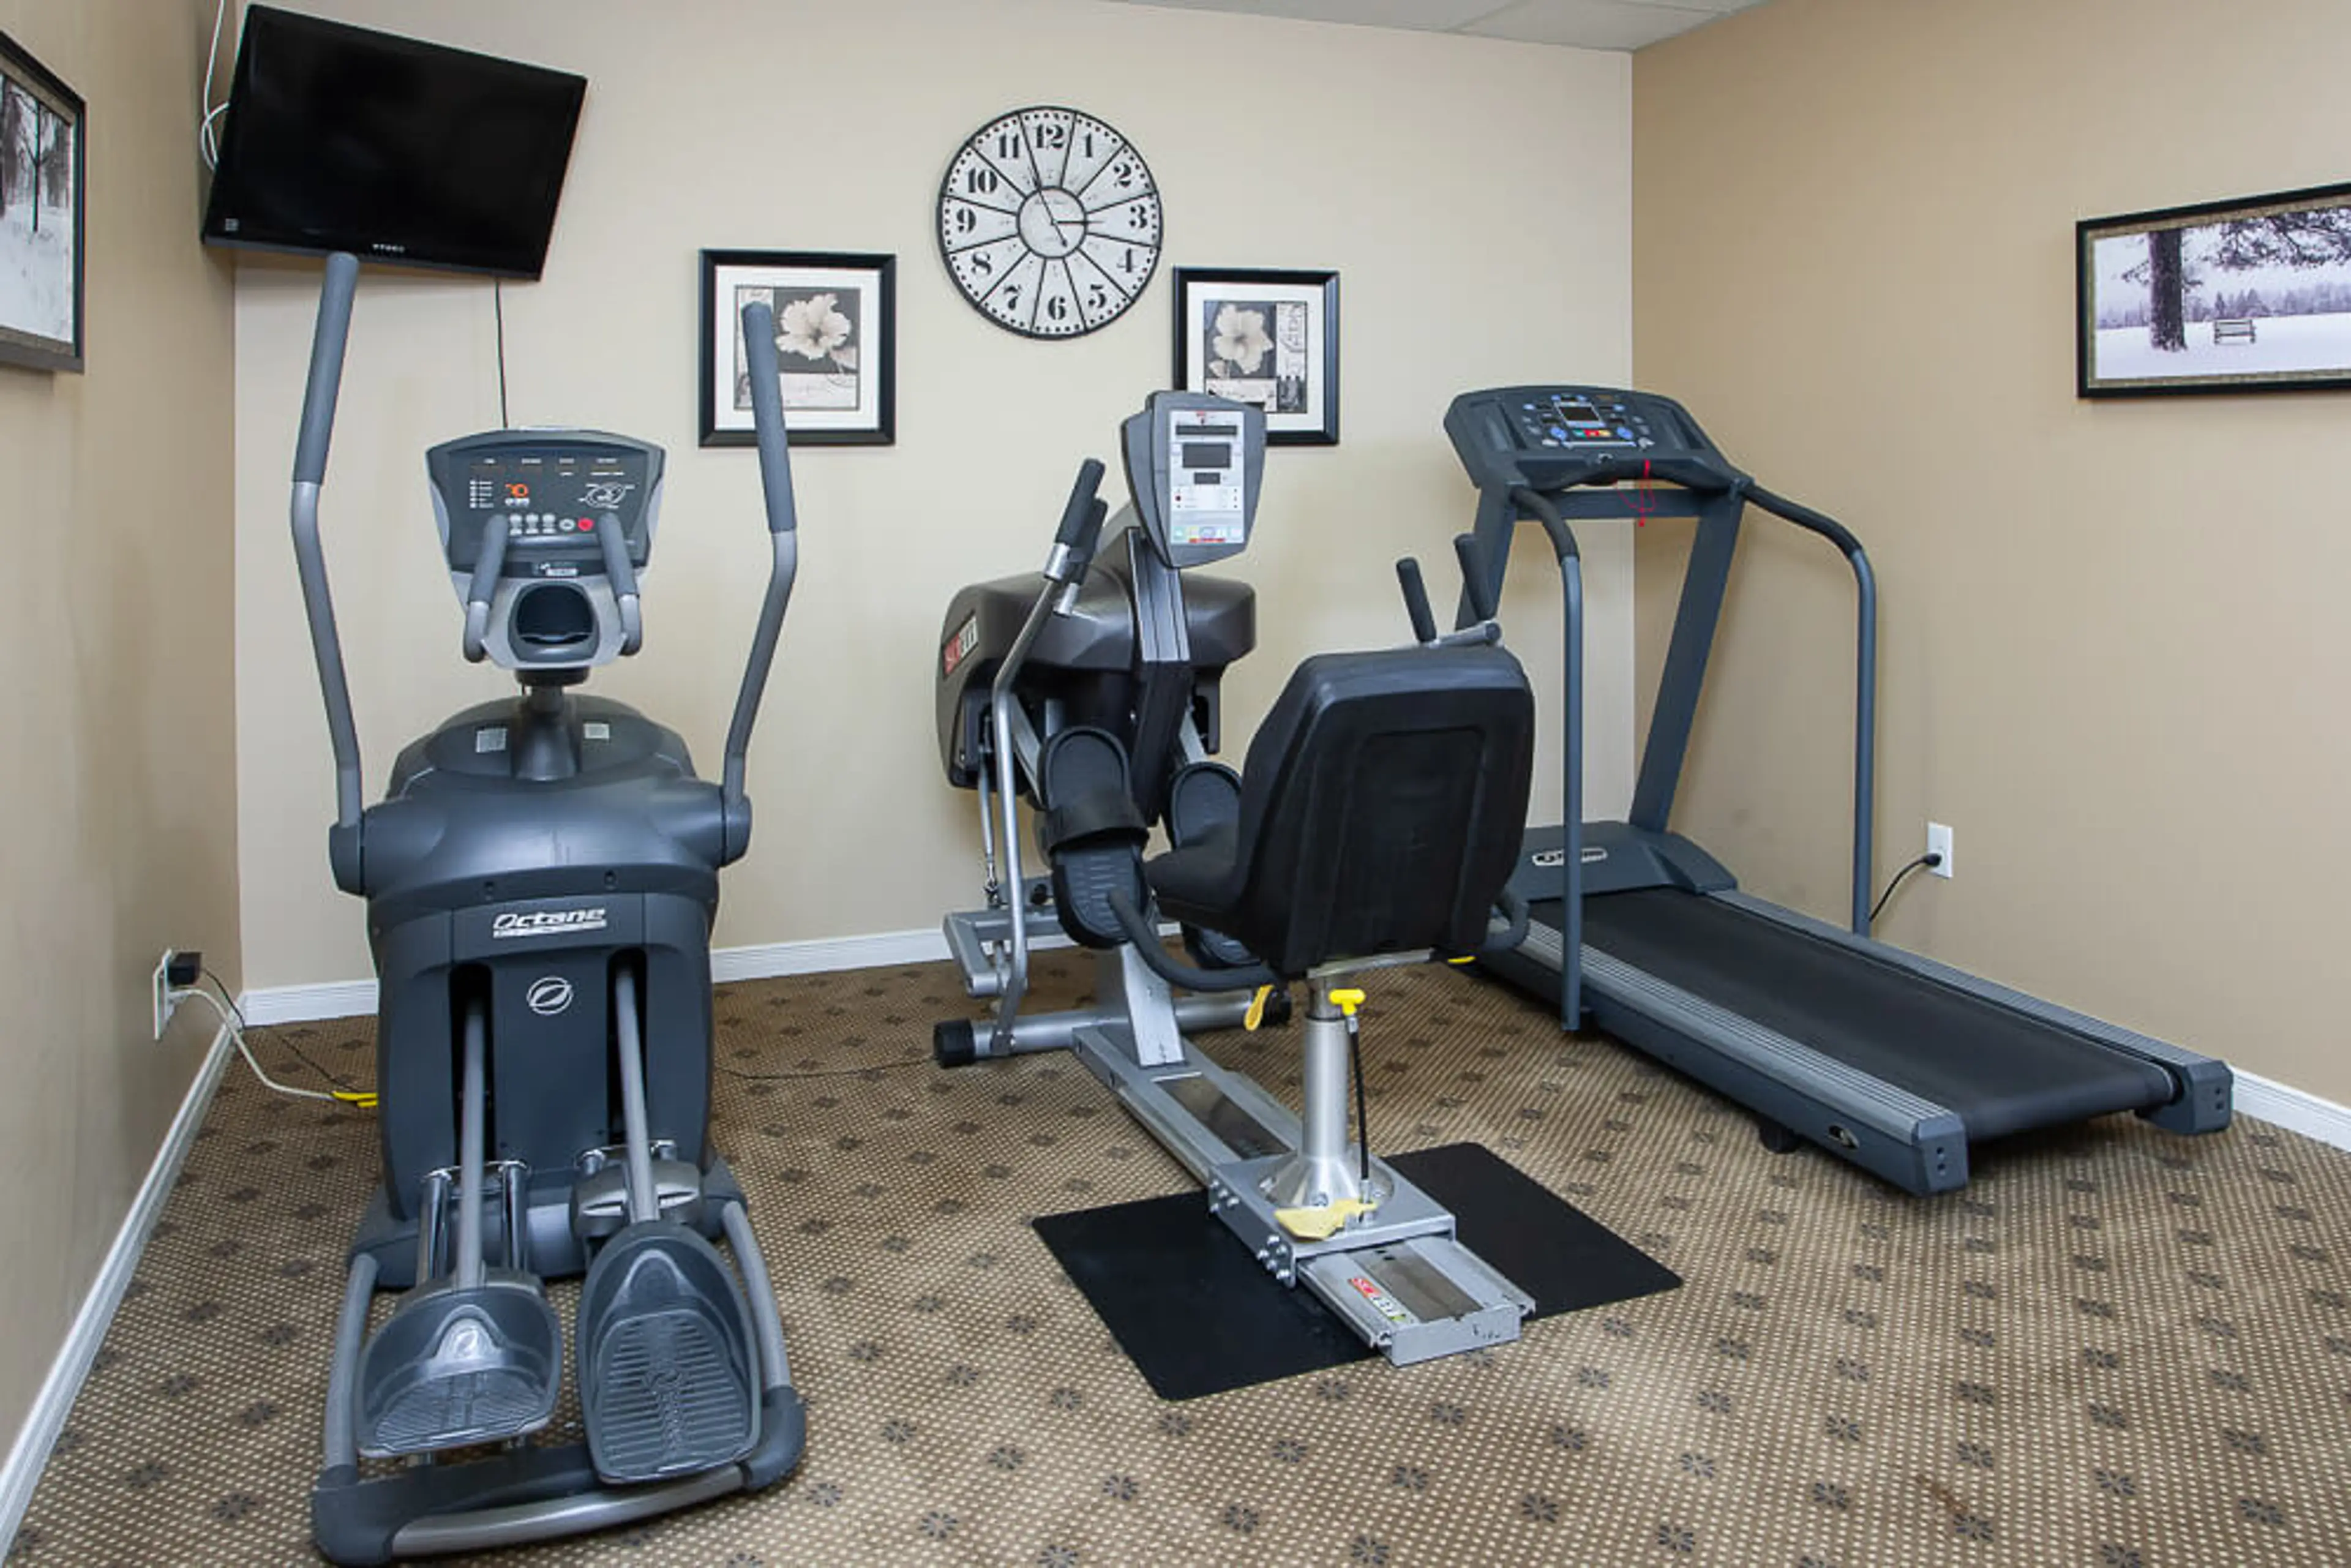 Barrhaven Exercise Room